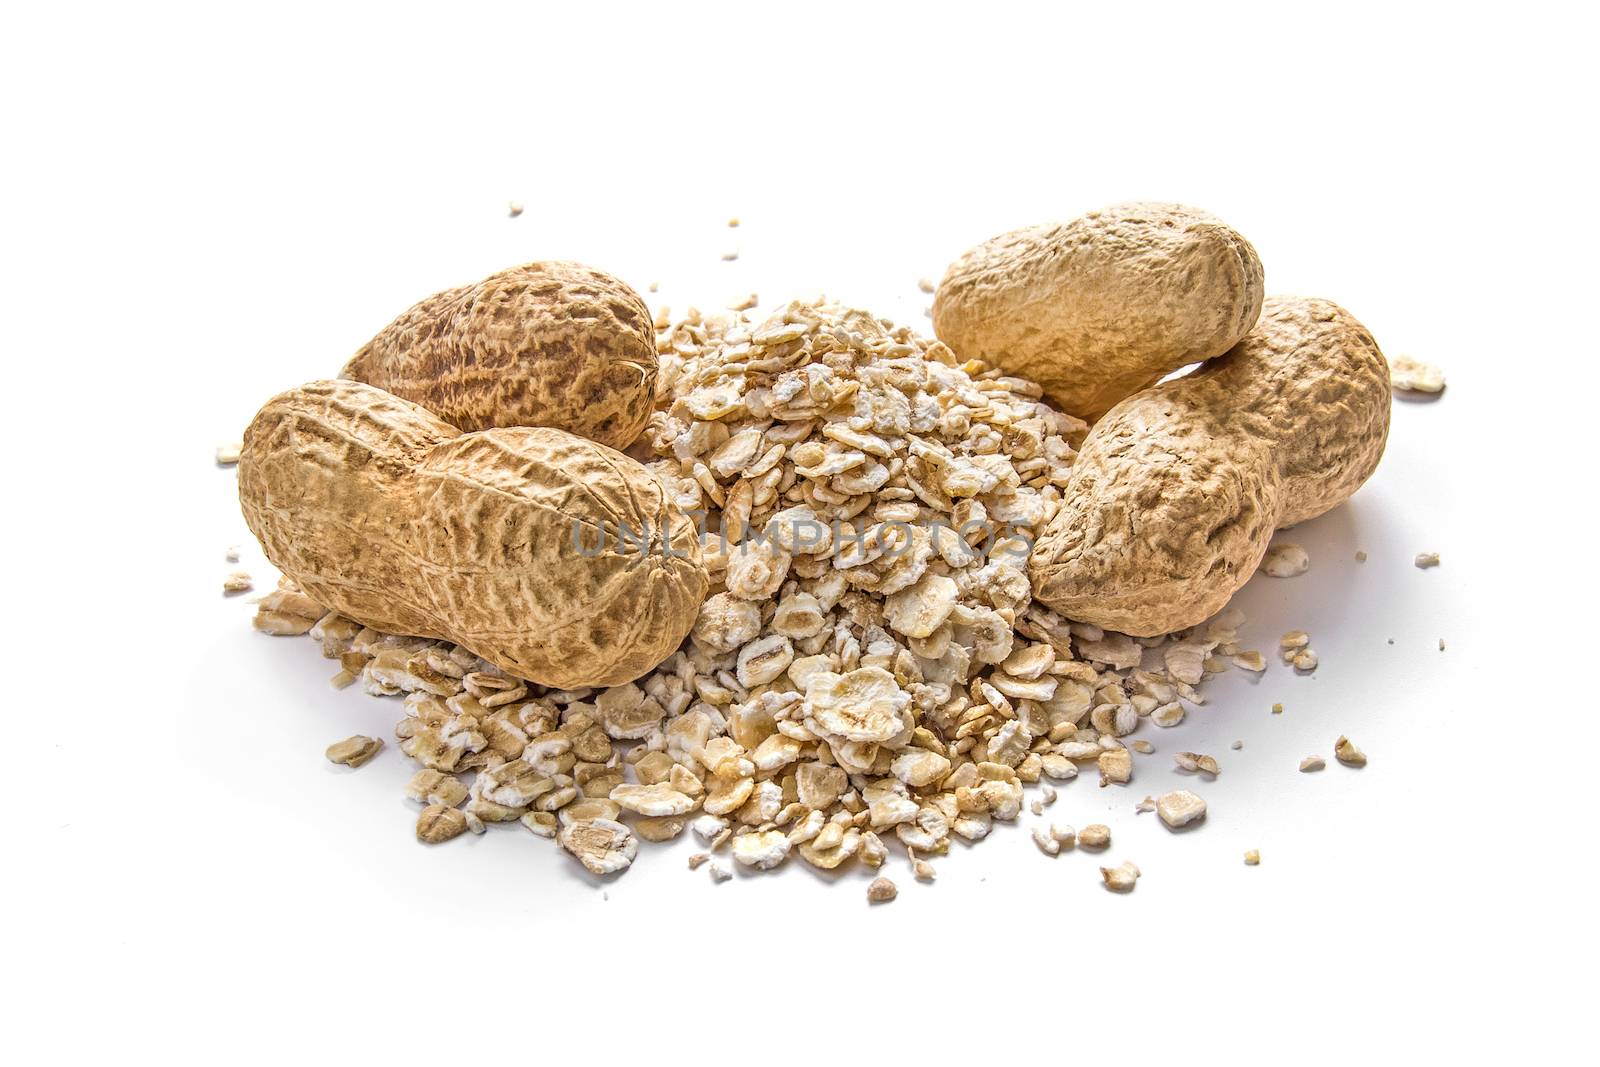 Peanuts and oatmeal grains on white background